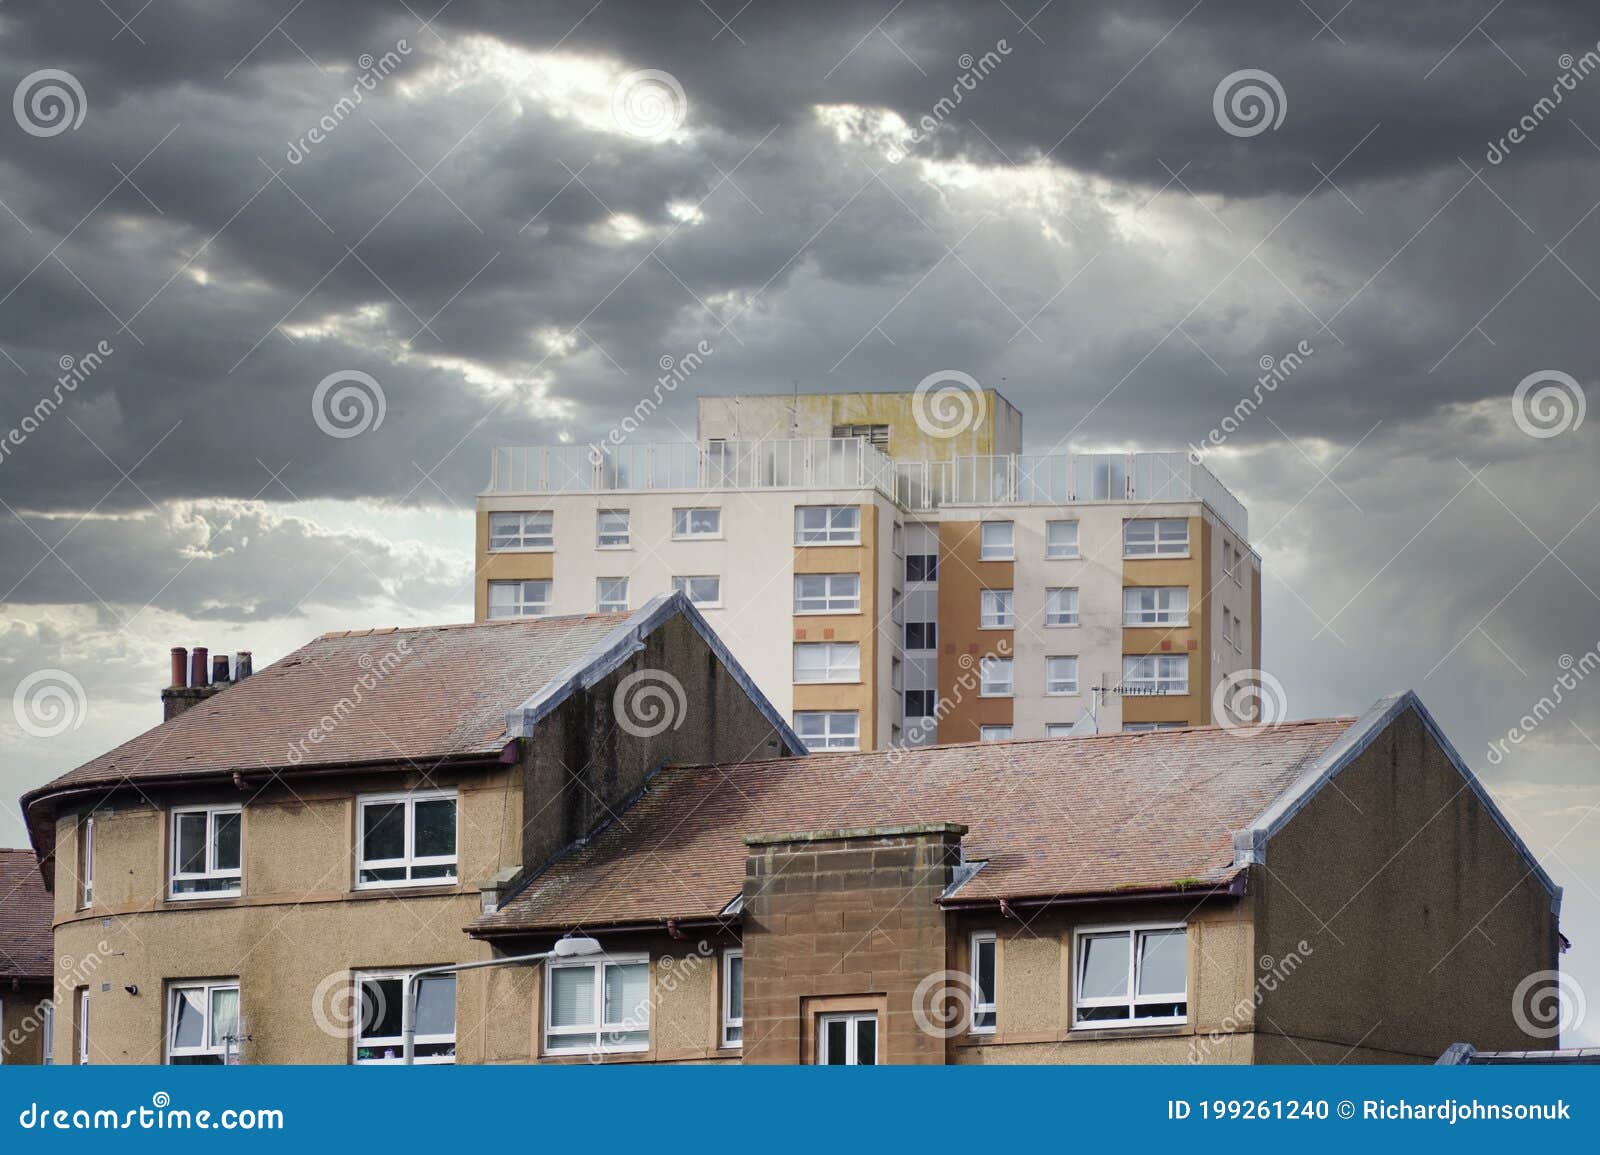 high rise council flats in deprived poor housing estate in port glasgow, inverclyde